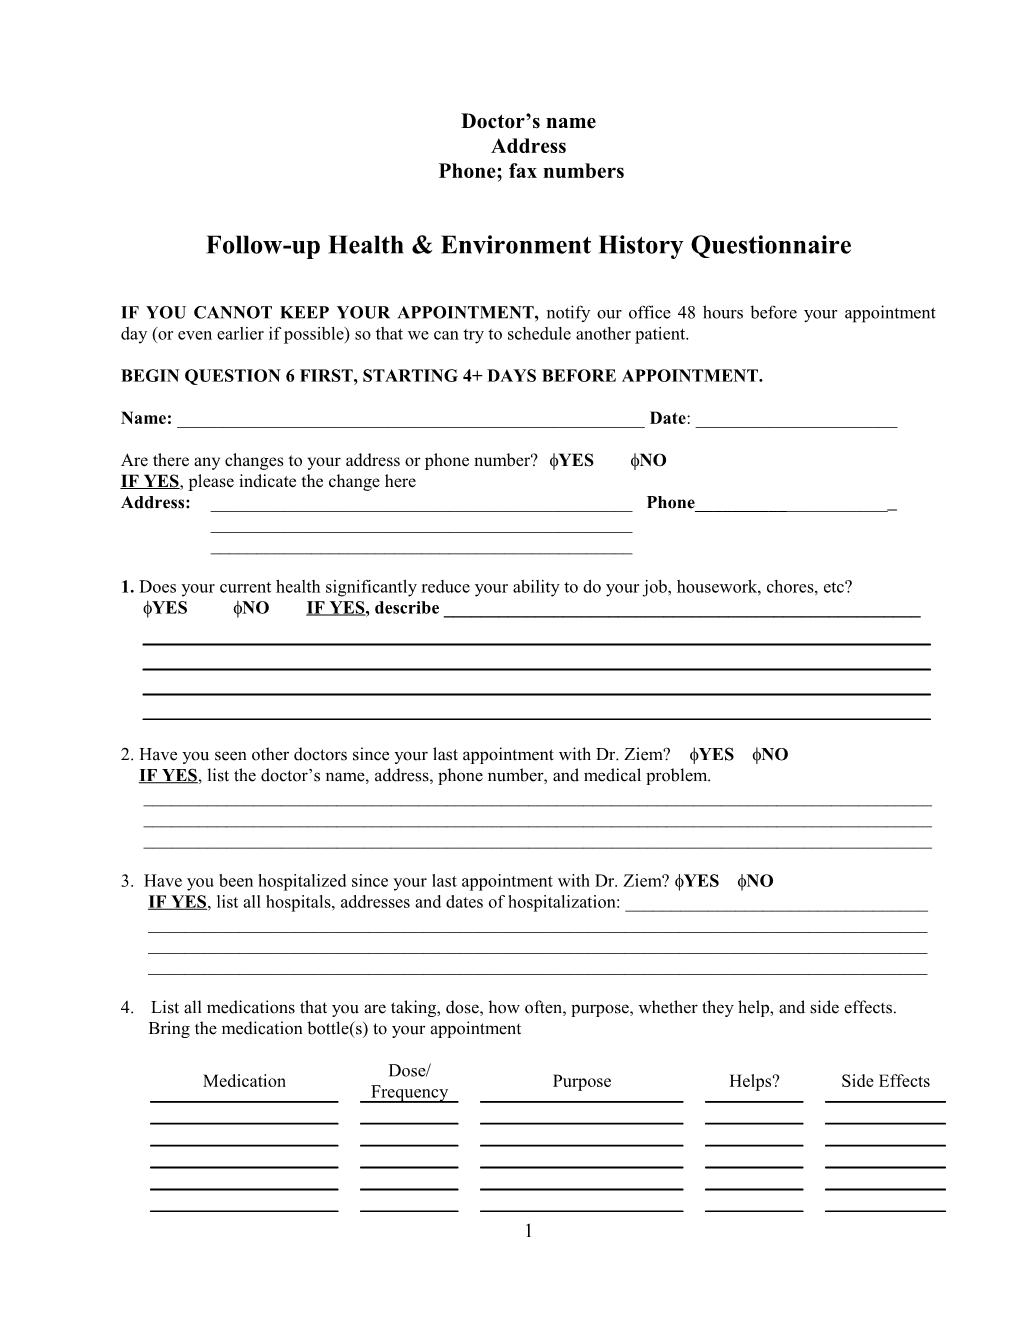 Follow-Up Health & Environment History Questionnaire